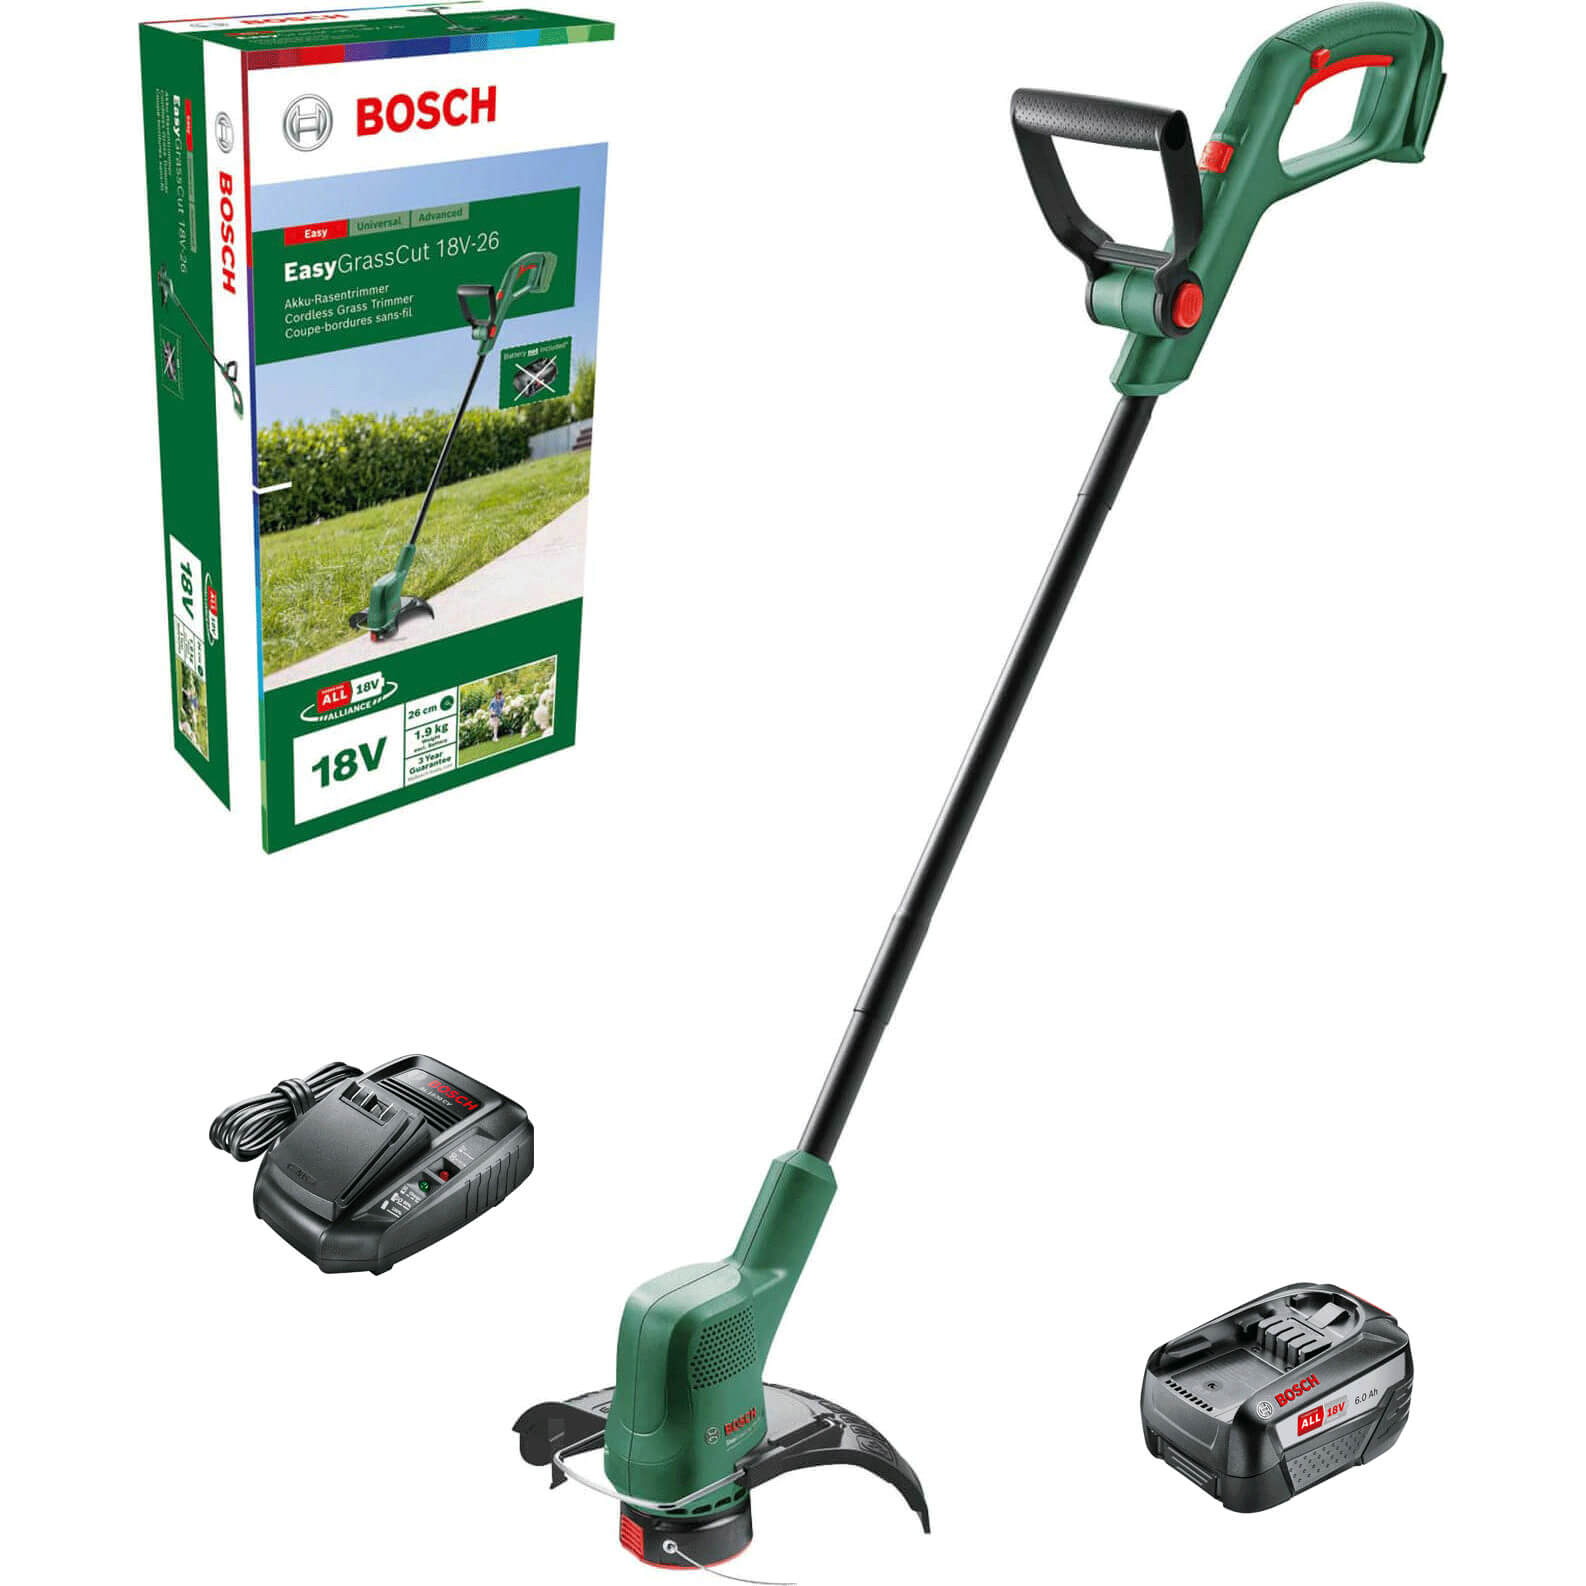 Image of Bosch EASYGRASSCUT 18V-26 18v Cordless Grass Trimmer and Edger 260mm 1 x 6ah Li-ion Charger